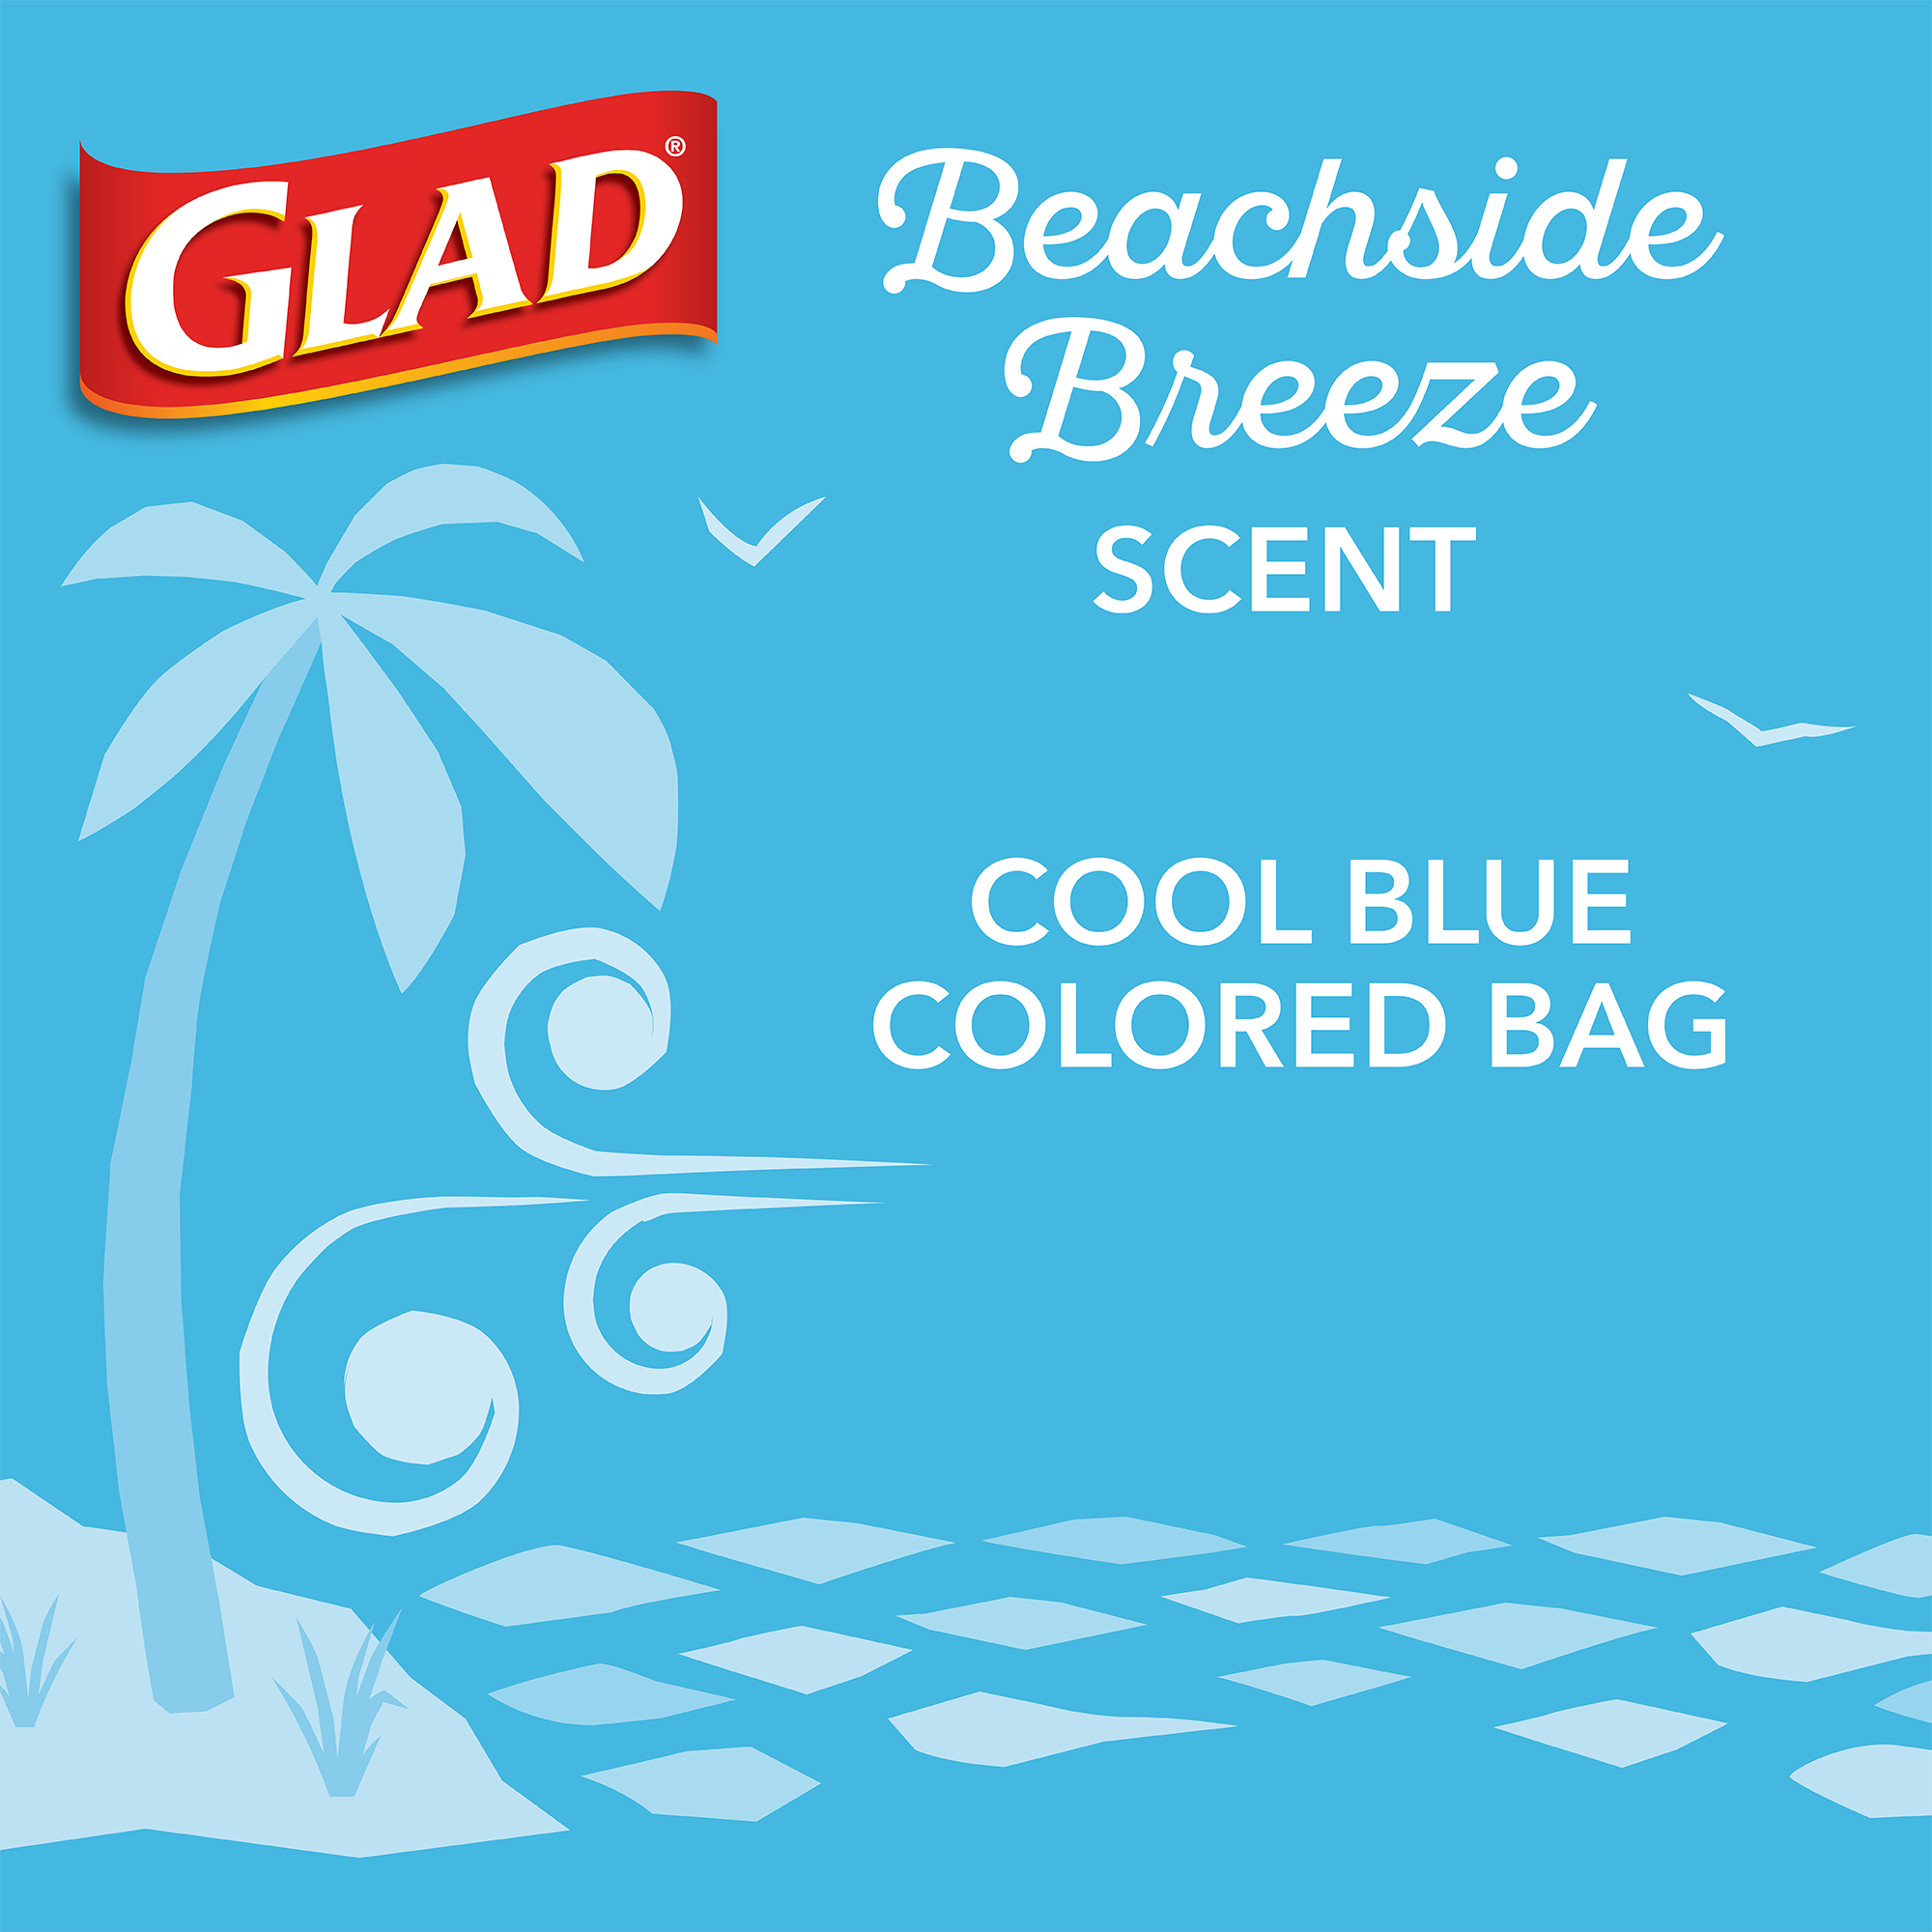 Beachside Breeze Small Garbage Bags